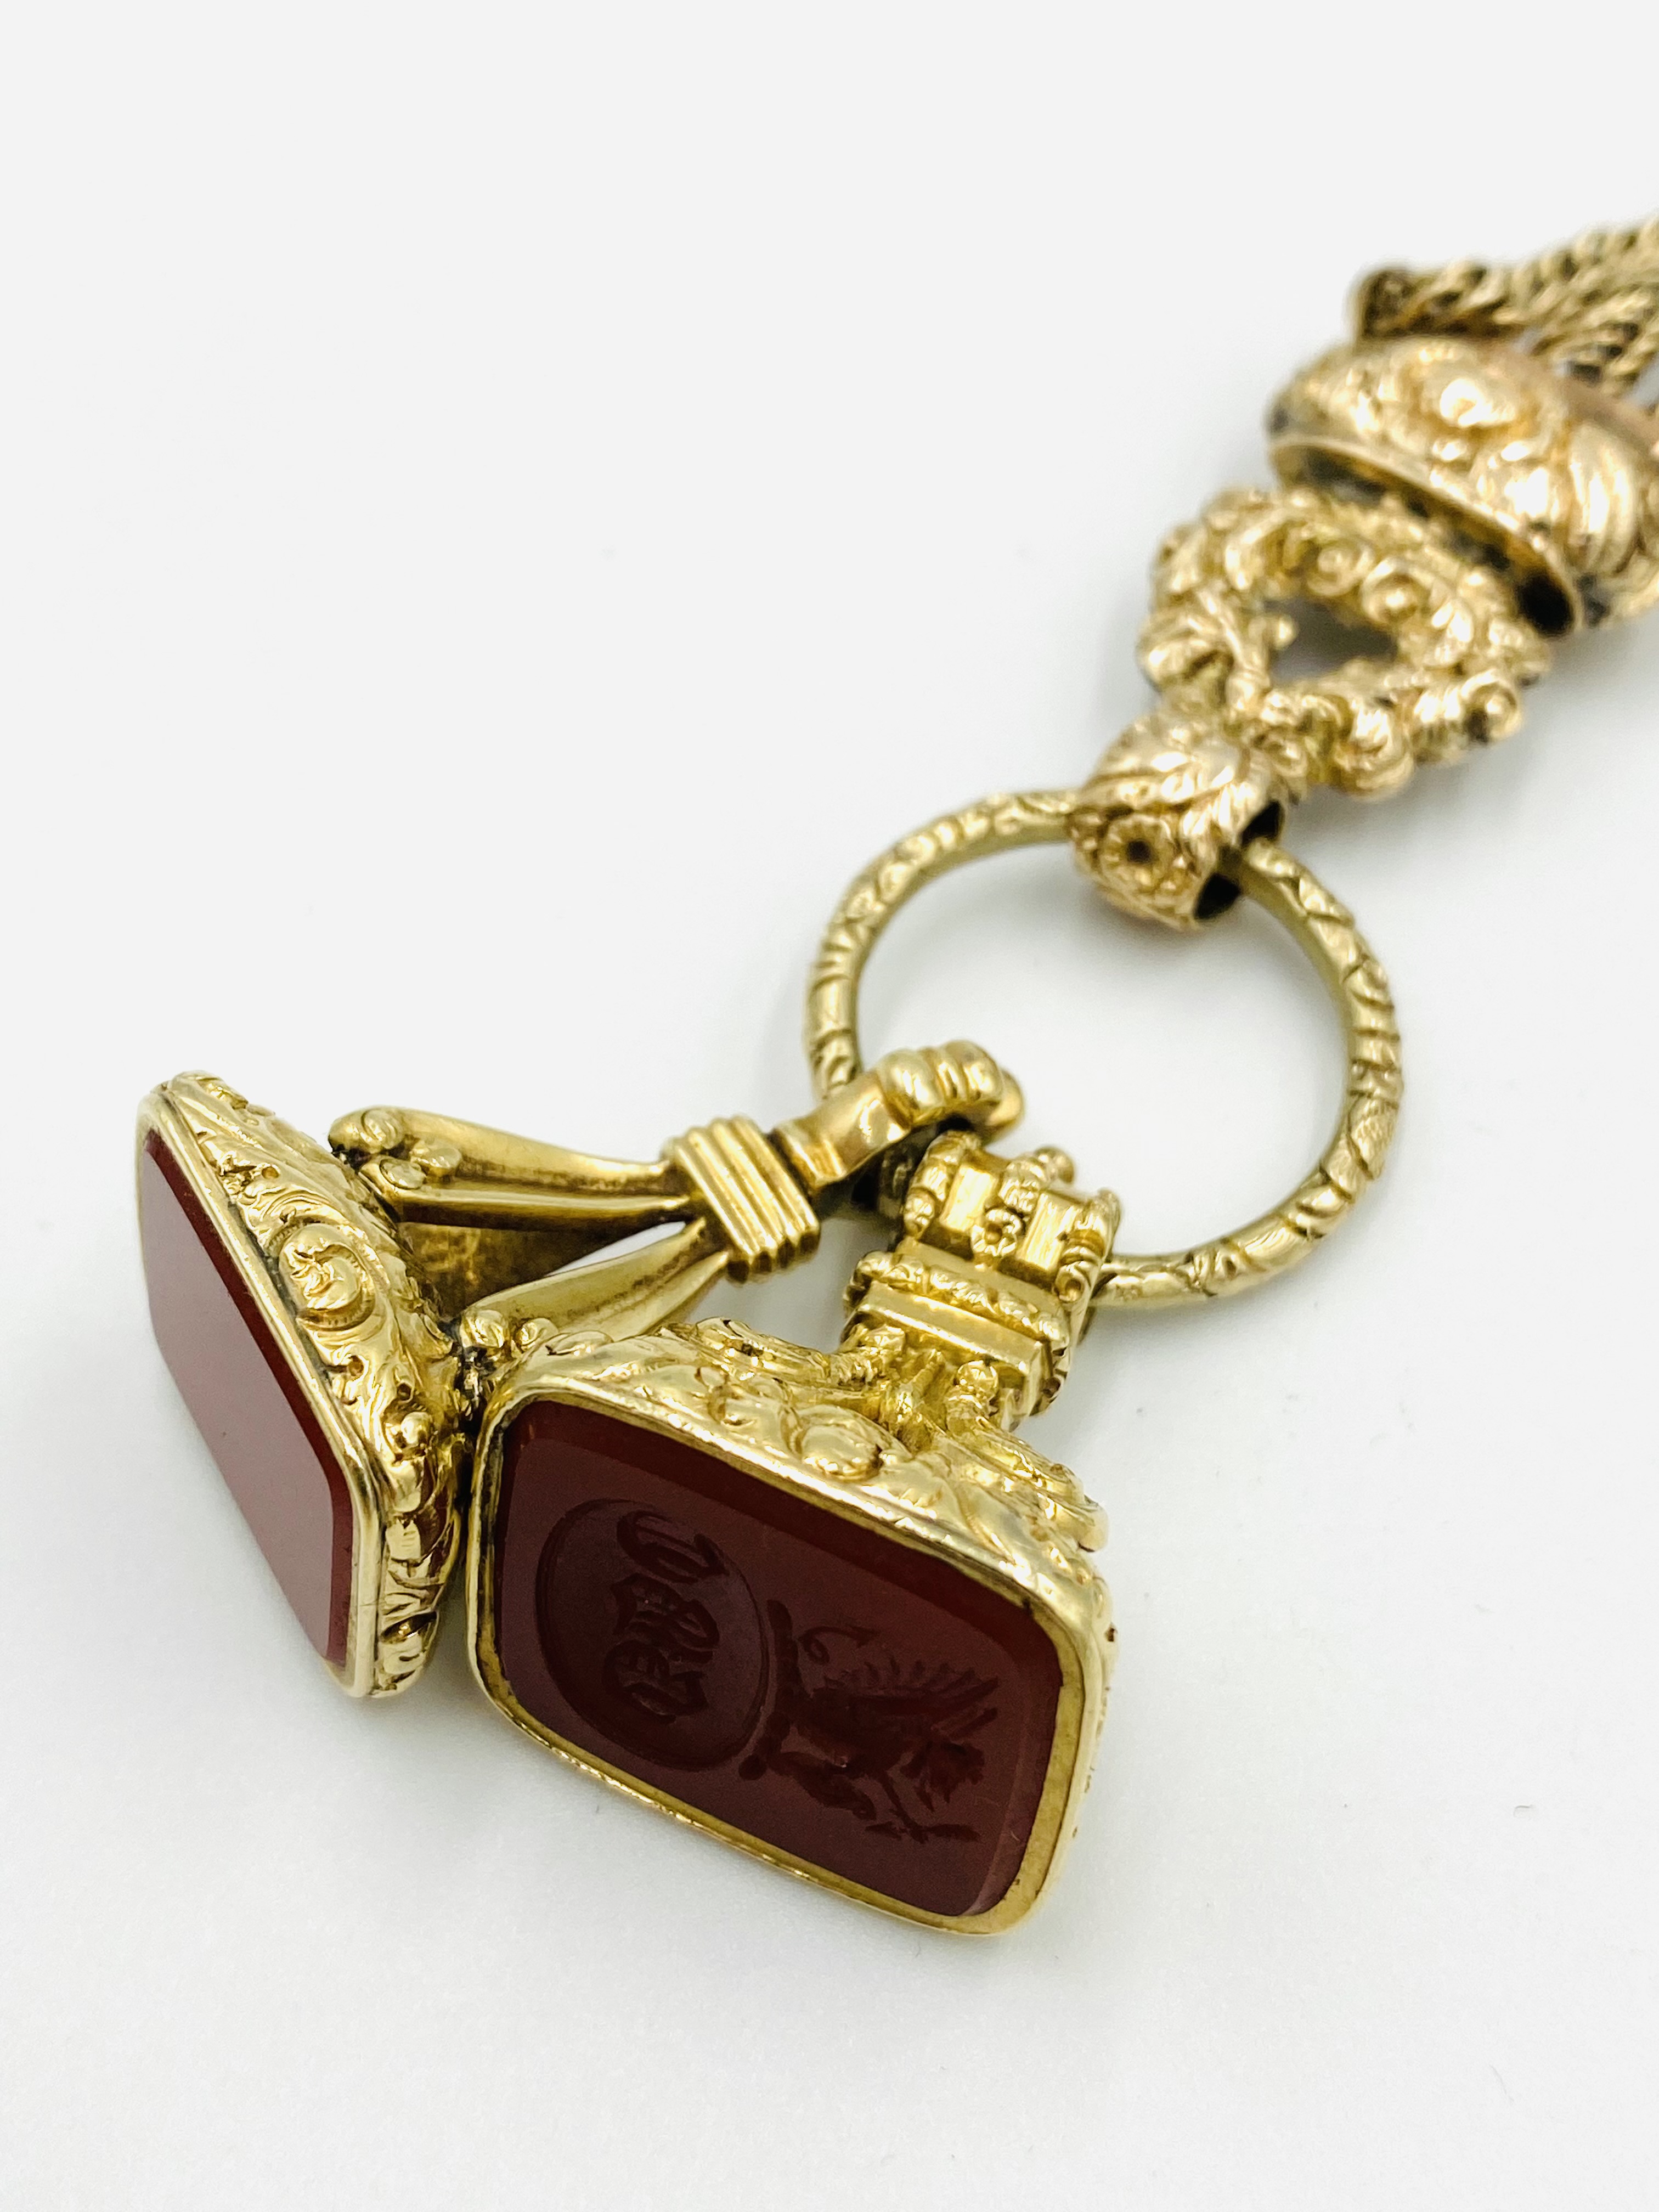 Gold fob chain with two seals - Image 2 of 8